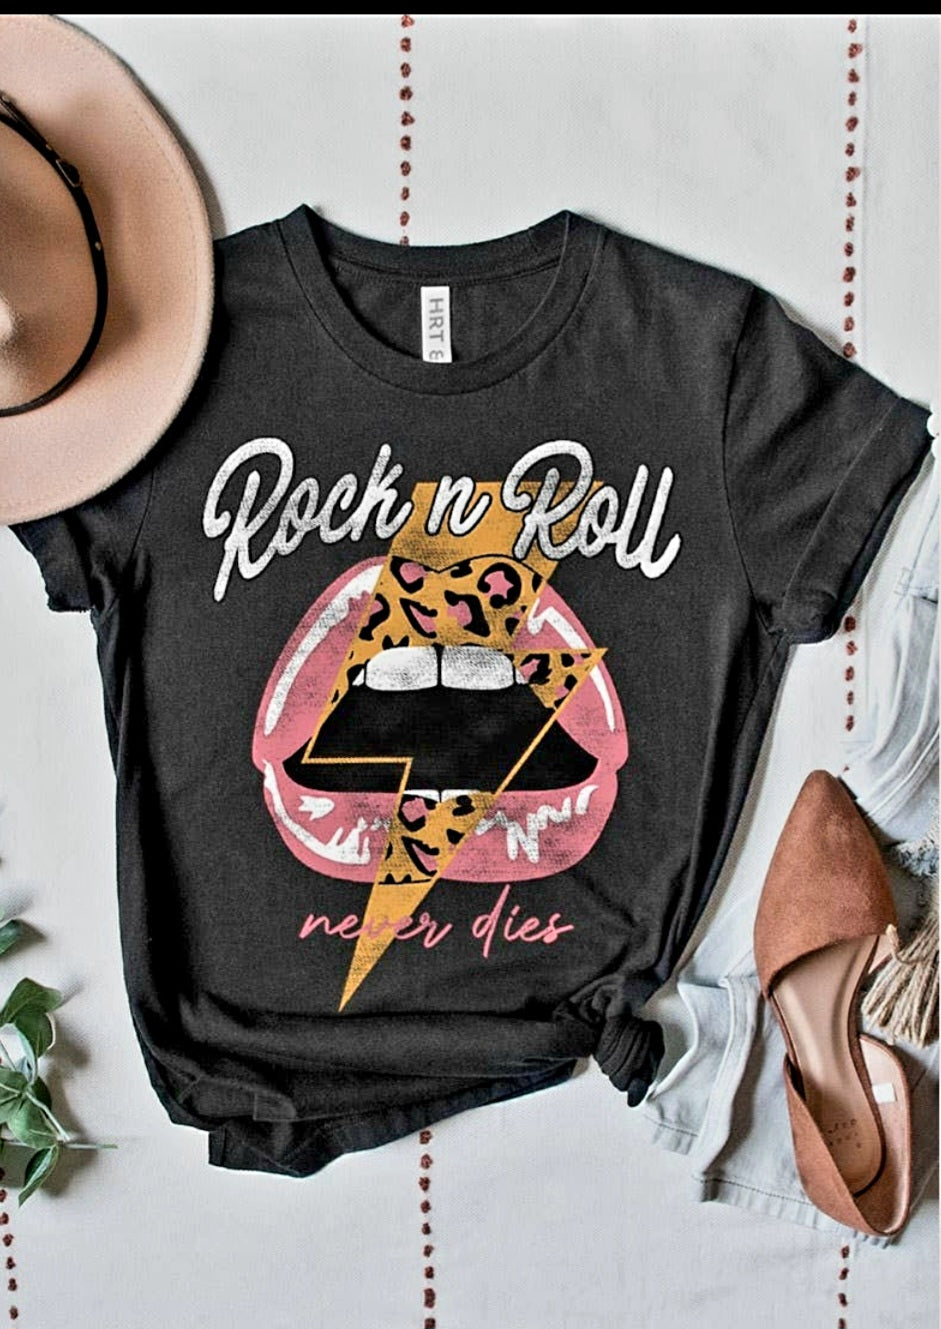 HRTandLUV - ROCK AND ROLL NEVER DIES SHORT SLEEVE GRAPHIC TOP - - ROCK AND ROLL NEVER DIES SHORT SLEEVE GRAPHIC TOP - Black